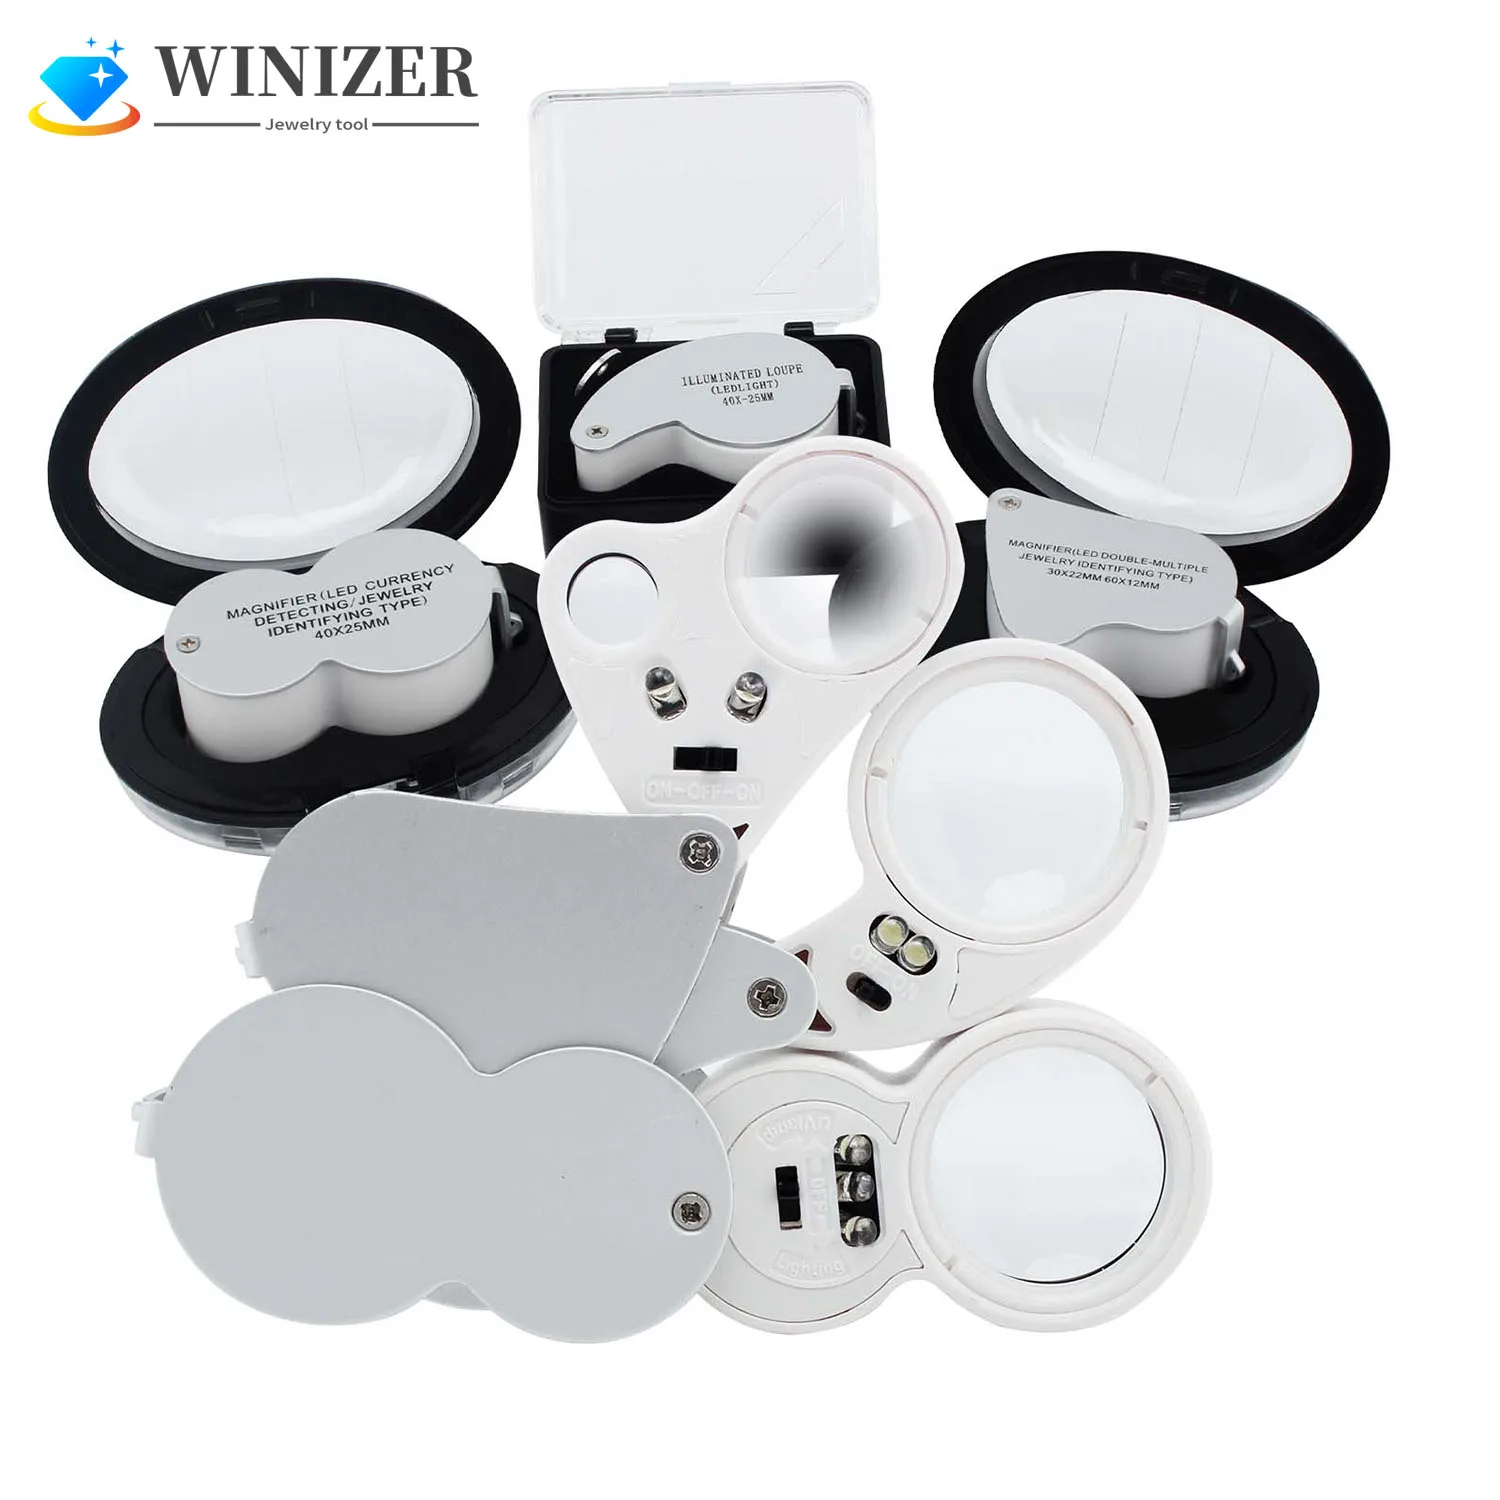 

30X 40X 60X Illuminated Jewelers Eye Loupe Magnifier, Foldable Jewelry Magnifiers with Bright LED Light for Gems, Jewelry, Coins